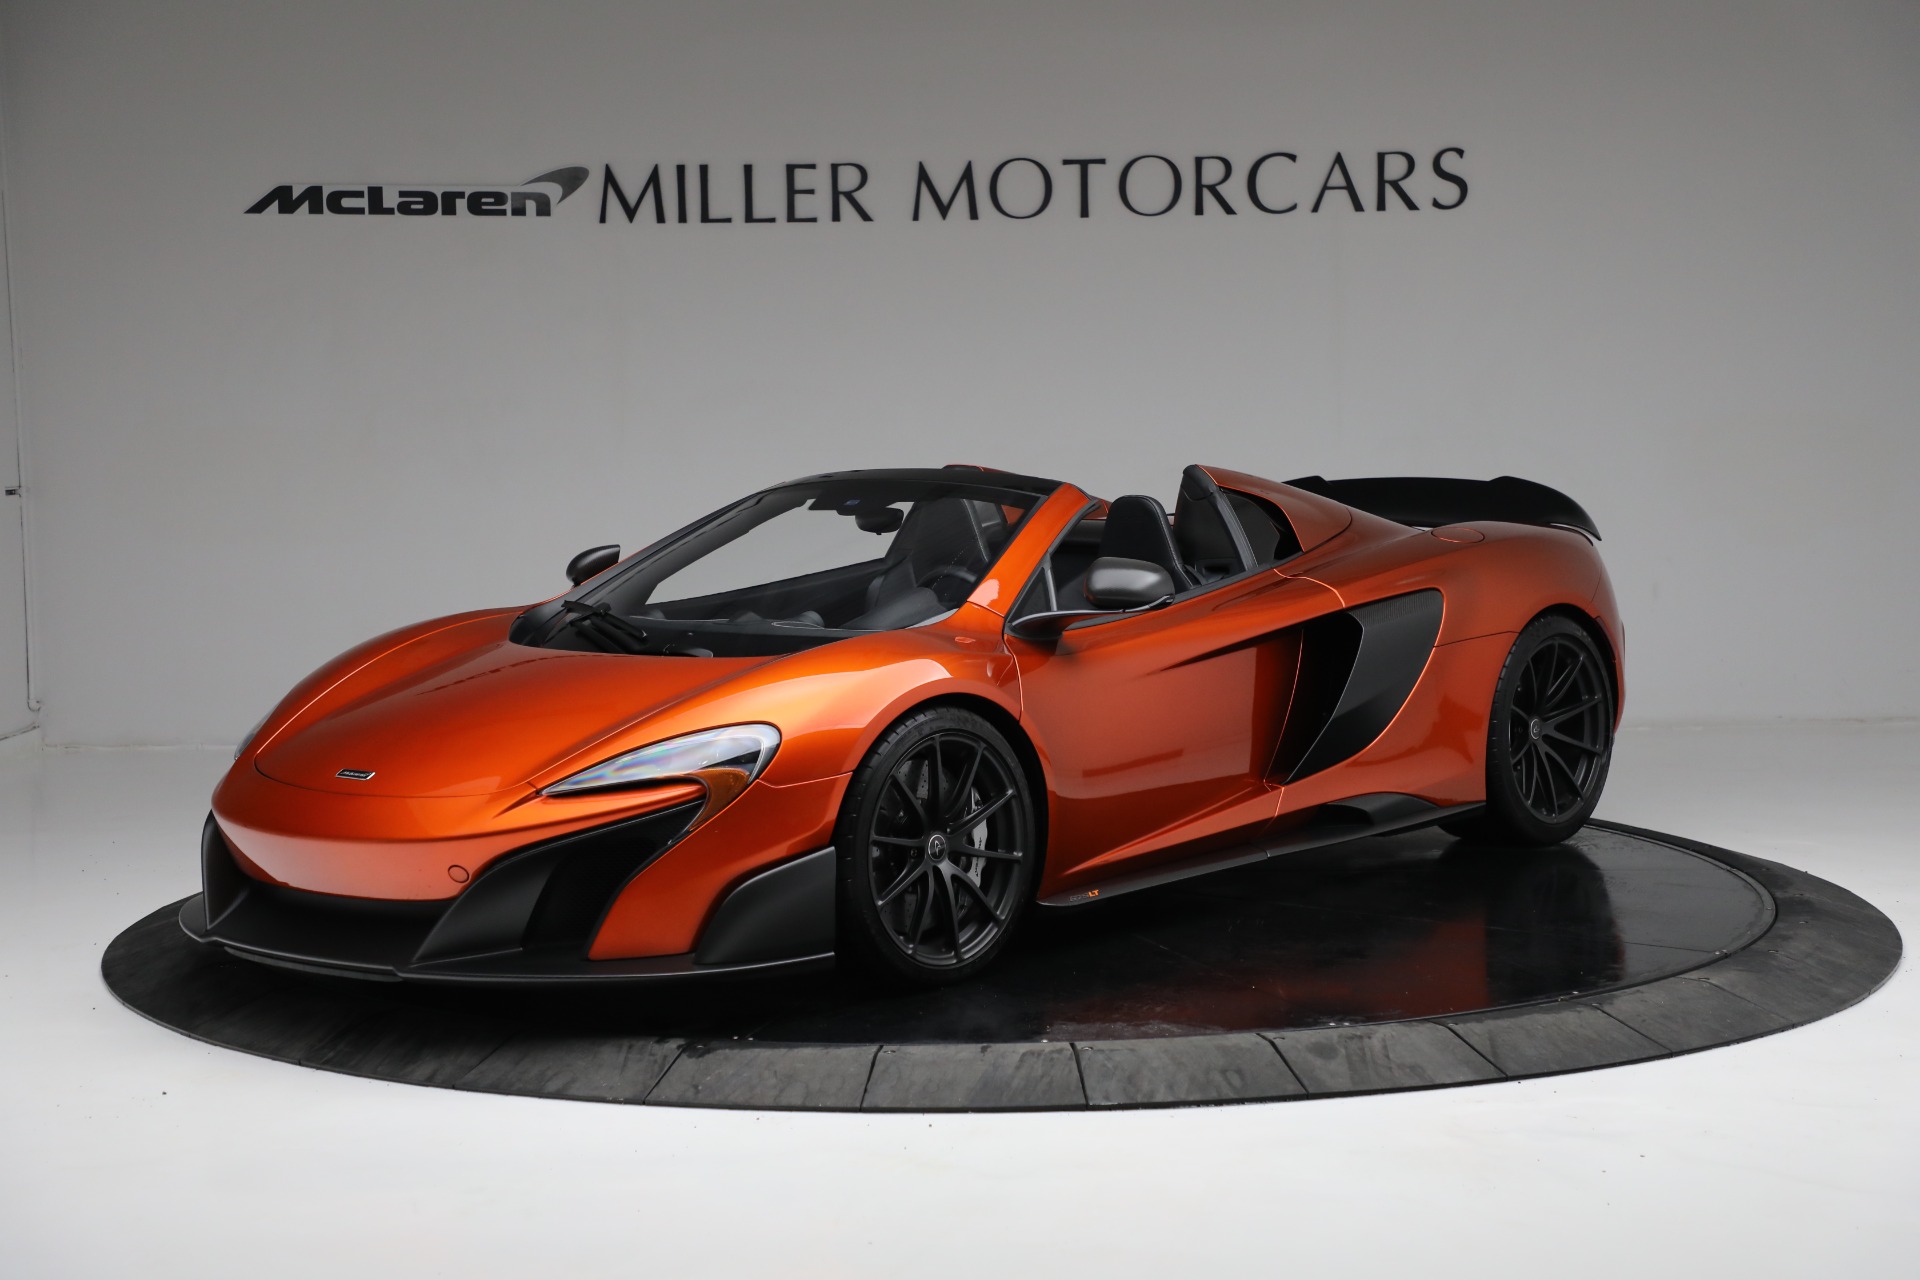 Used 2016 McLaren 675LT Spider for sale $275,900 at Rolls-Royce Motor Cars Greenwich in Greenwich CT 06830 1